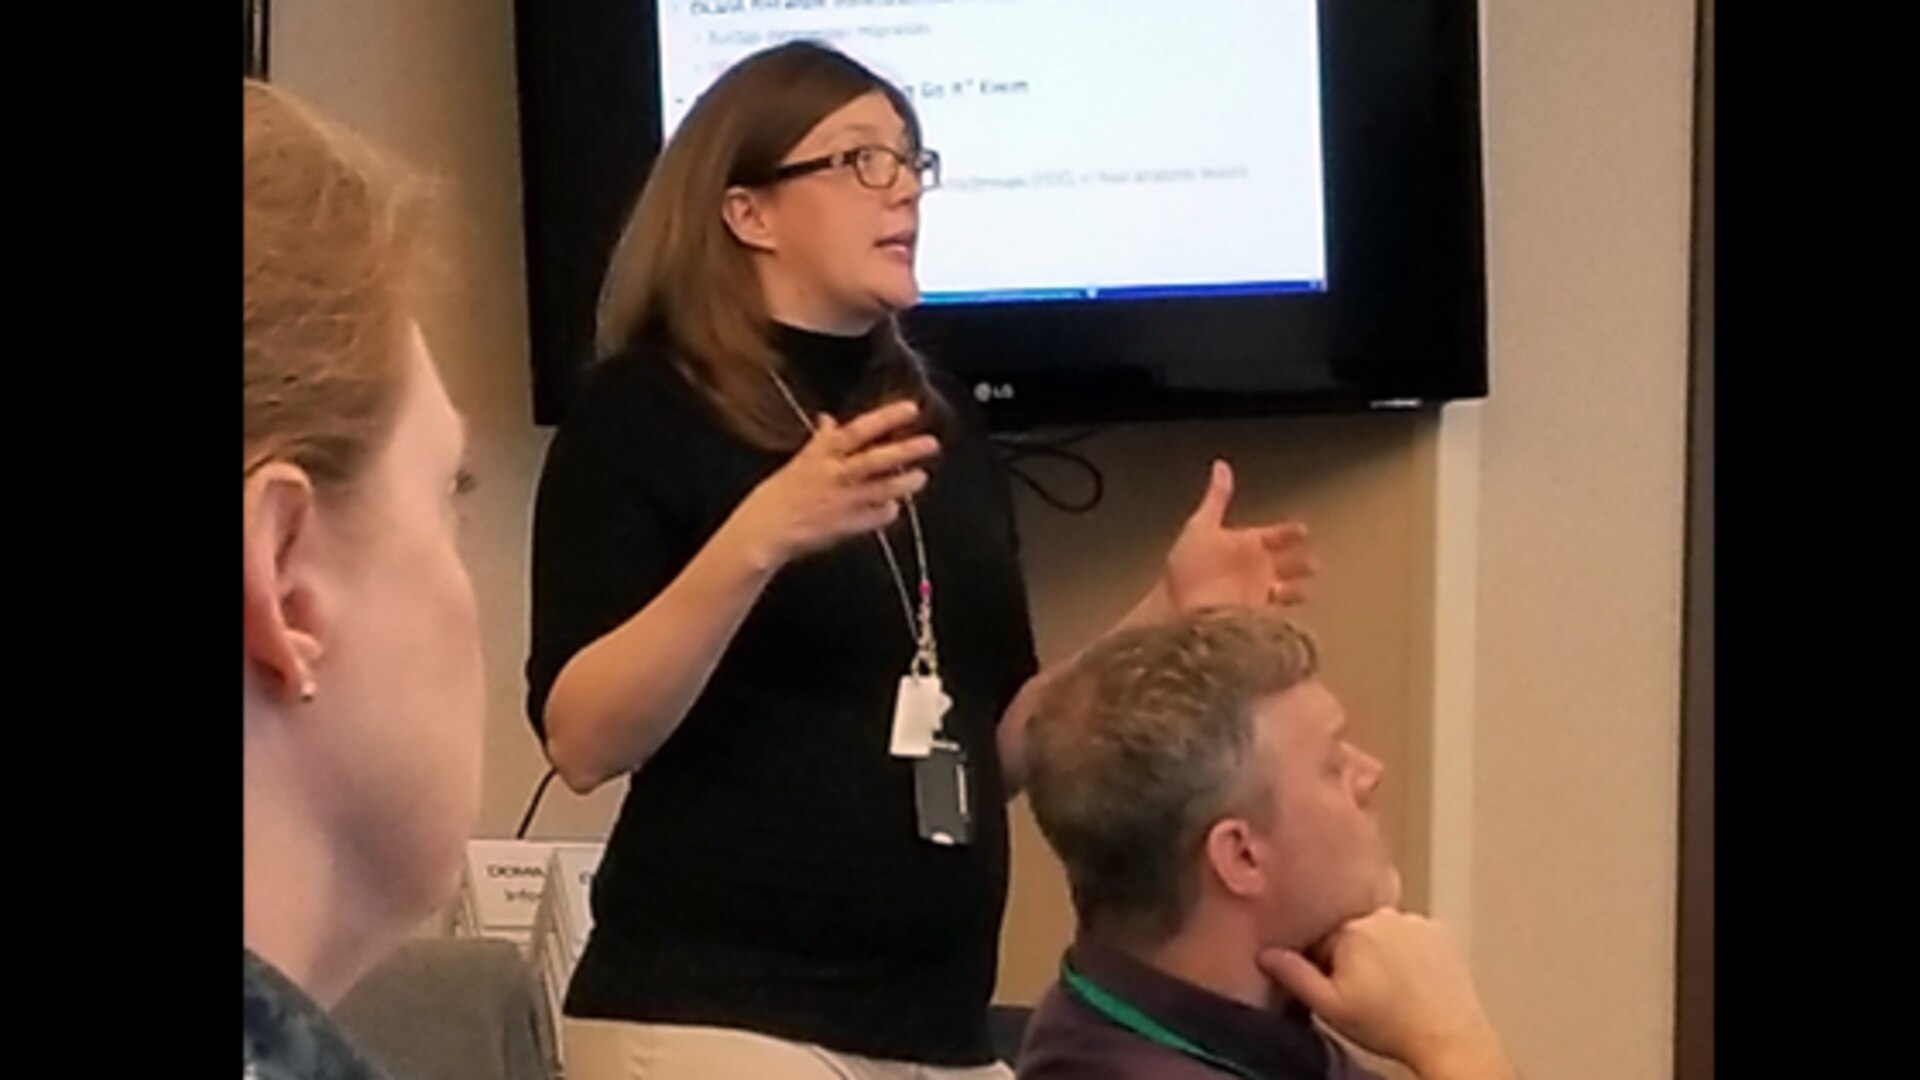 Michelyne LeBlanc, who works in the Defense Contract Management Agency’s Information Technology directorate, participated in a cross capability coordination summit March 19-20, 2018, at Fort Lee, Virginia. The summit allowed employees to discuss the Business Capability Framework. (Photo courtesy of Marie Hechsel)